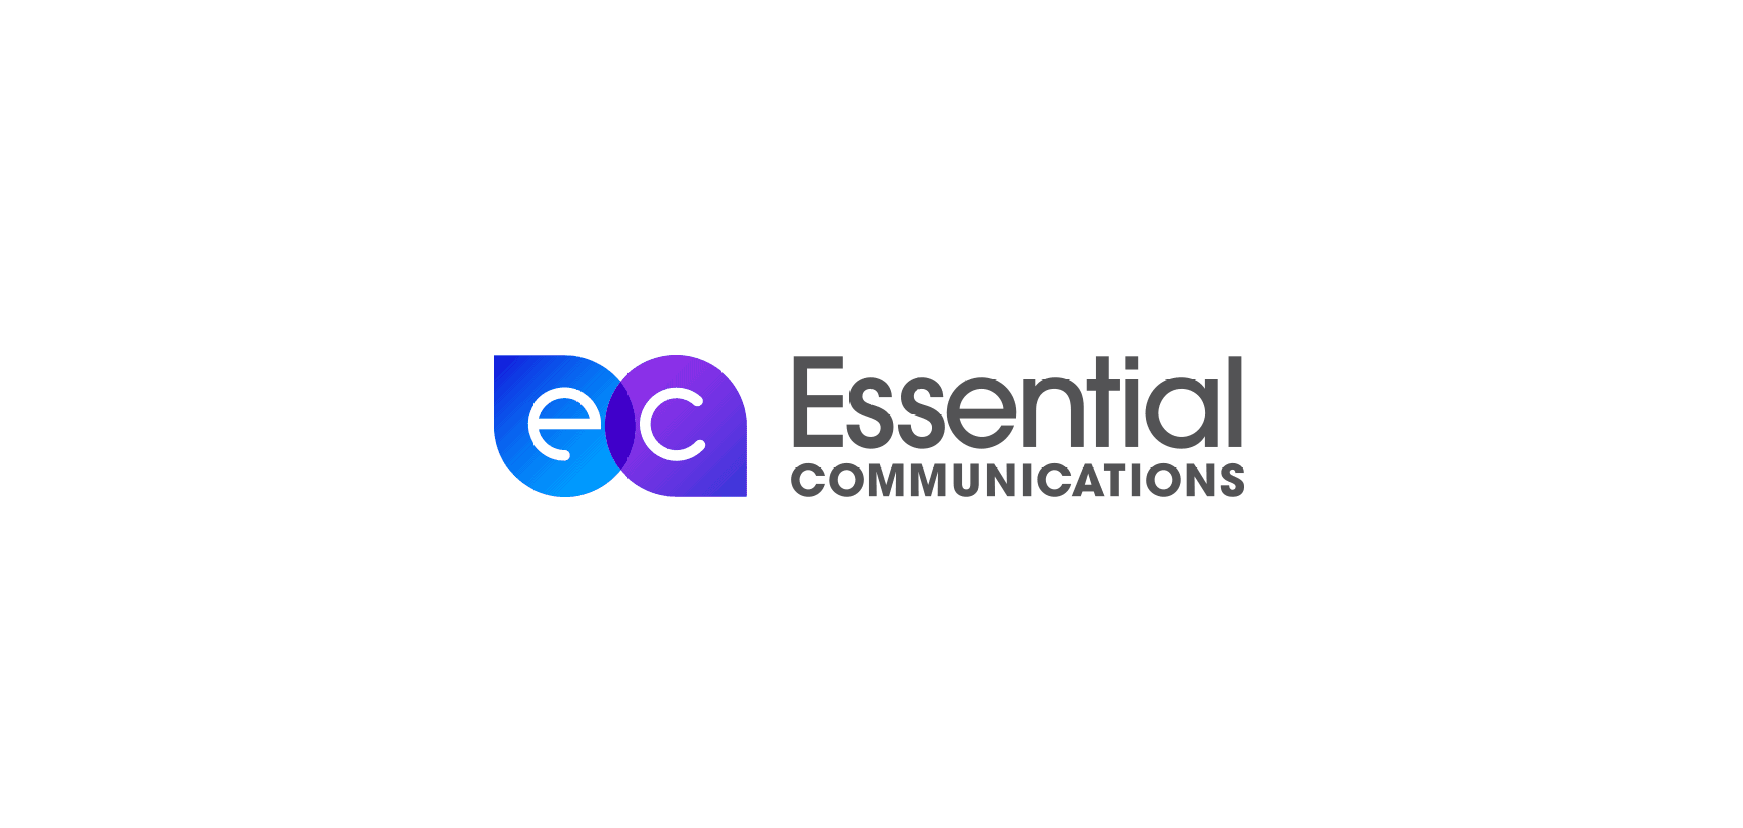 Accelerate Your Journey - Essential Communications